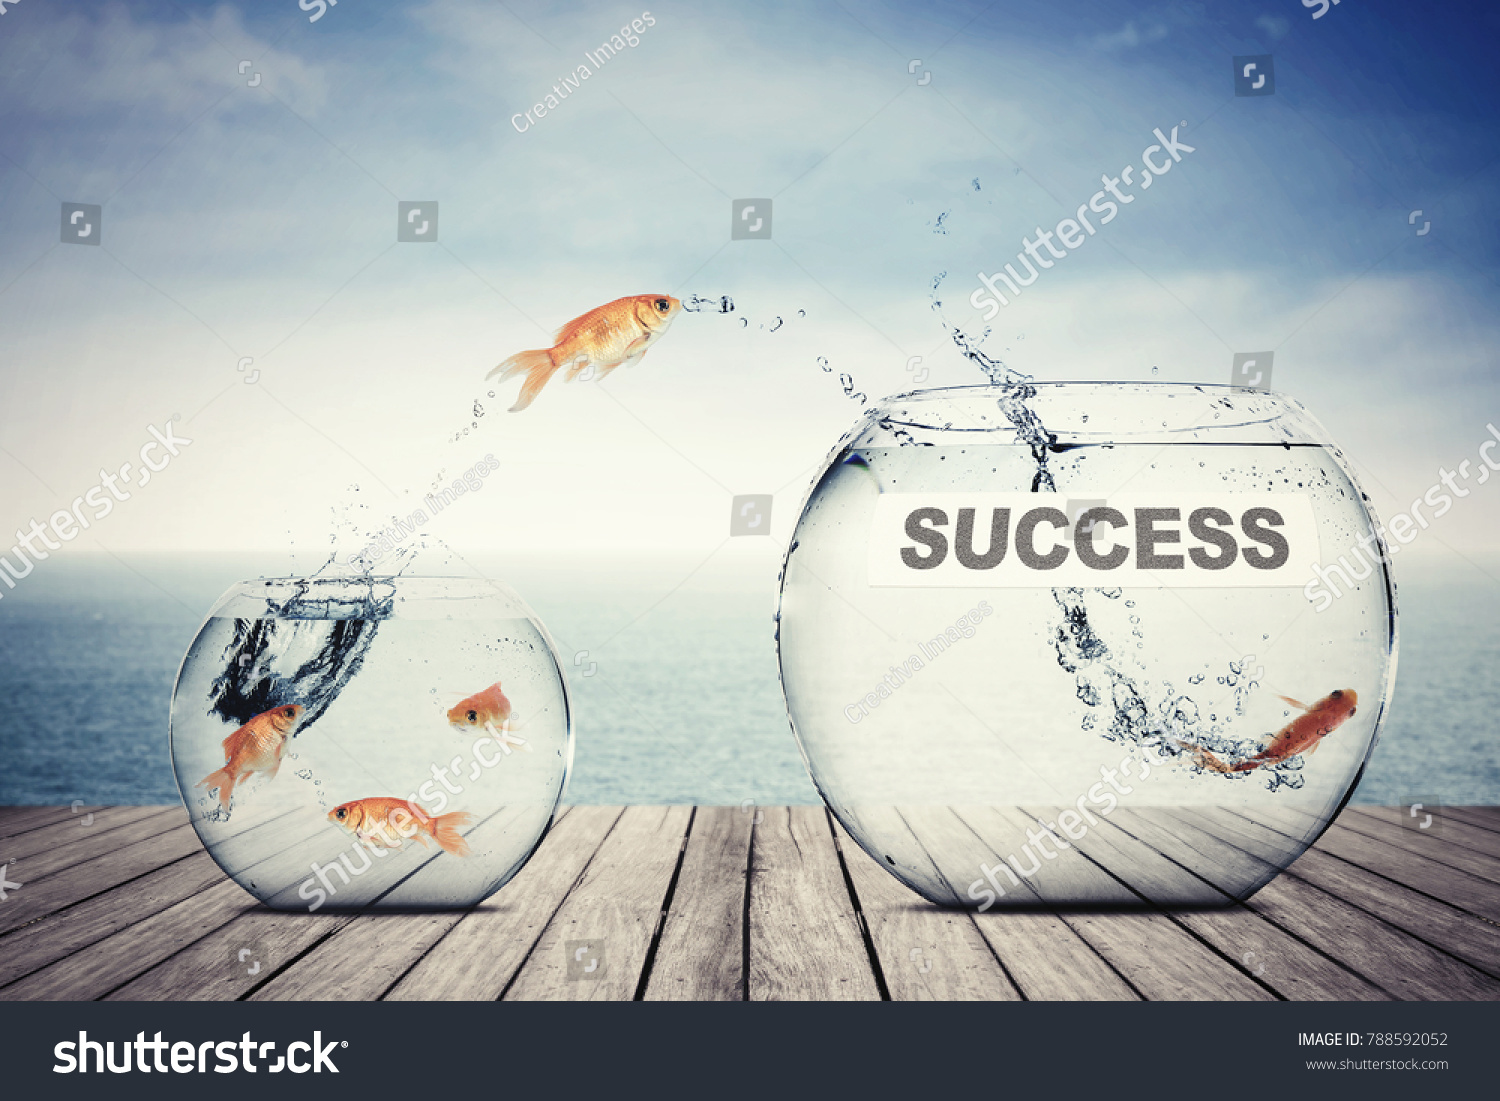 Picture of golden fish leaping to another aquarium with success word, concept of better business #788592052